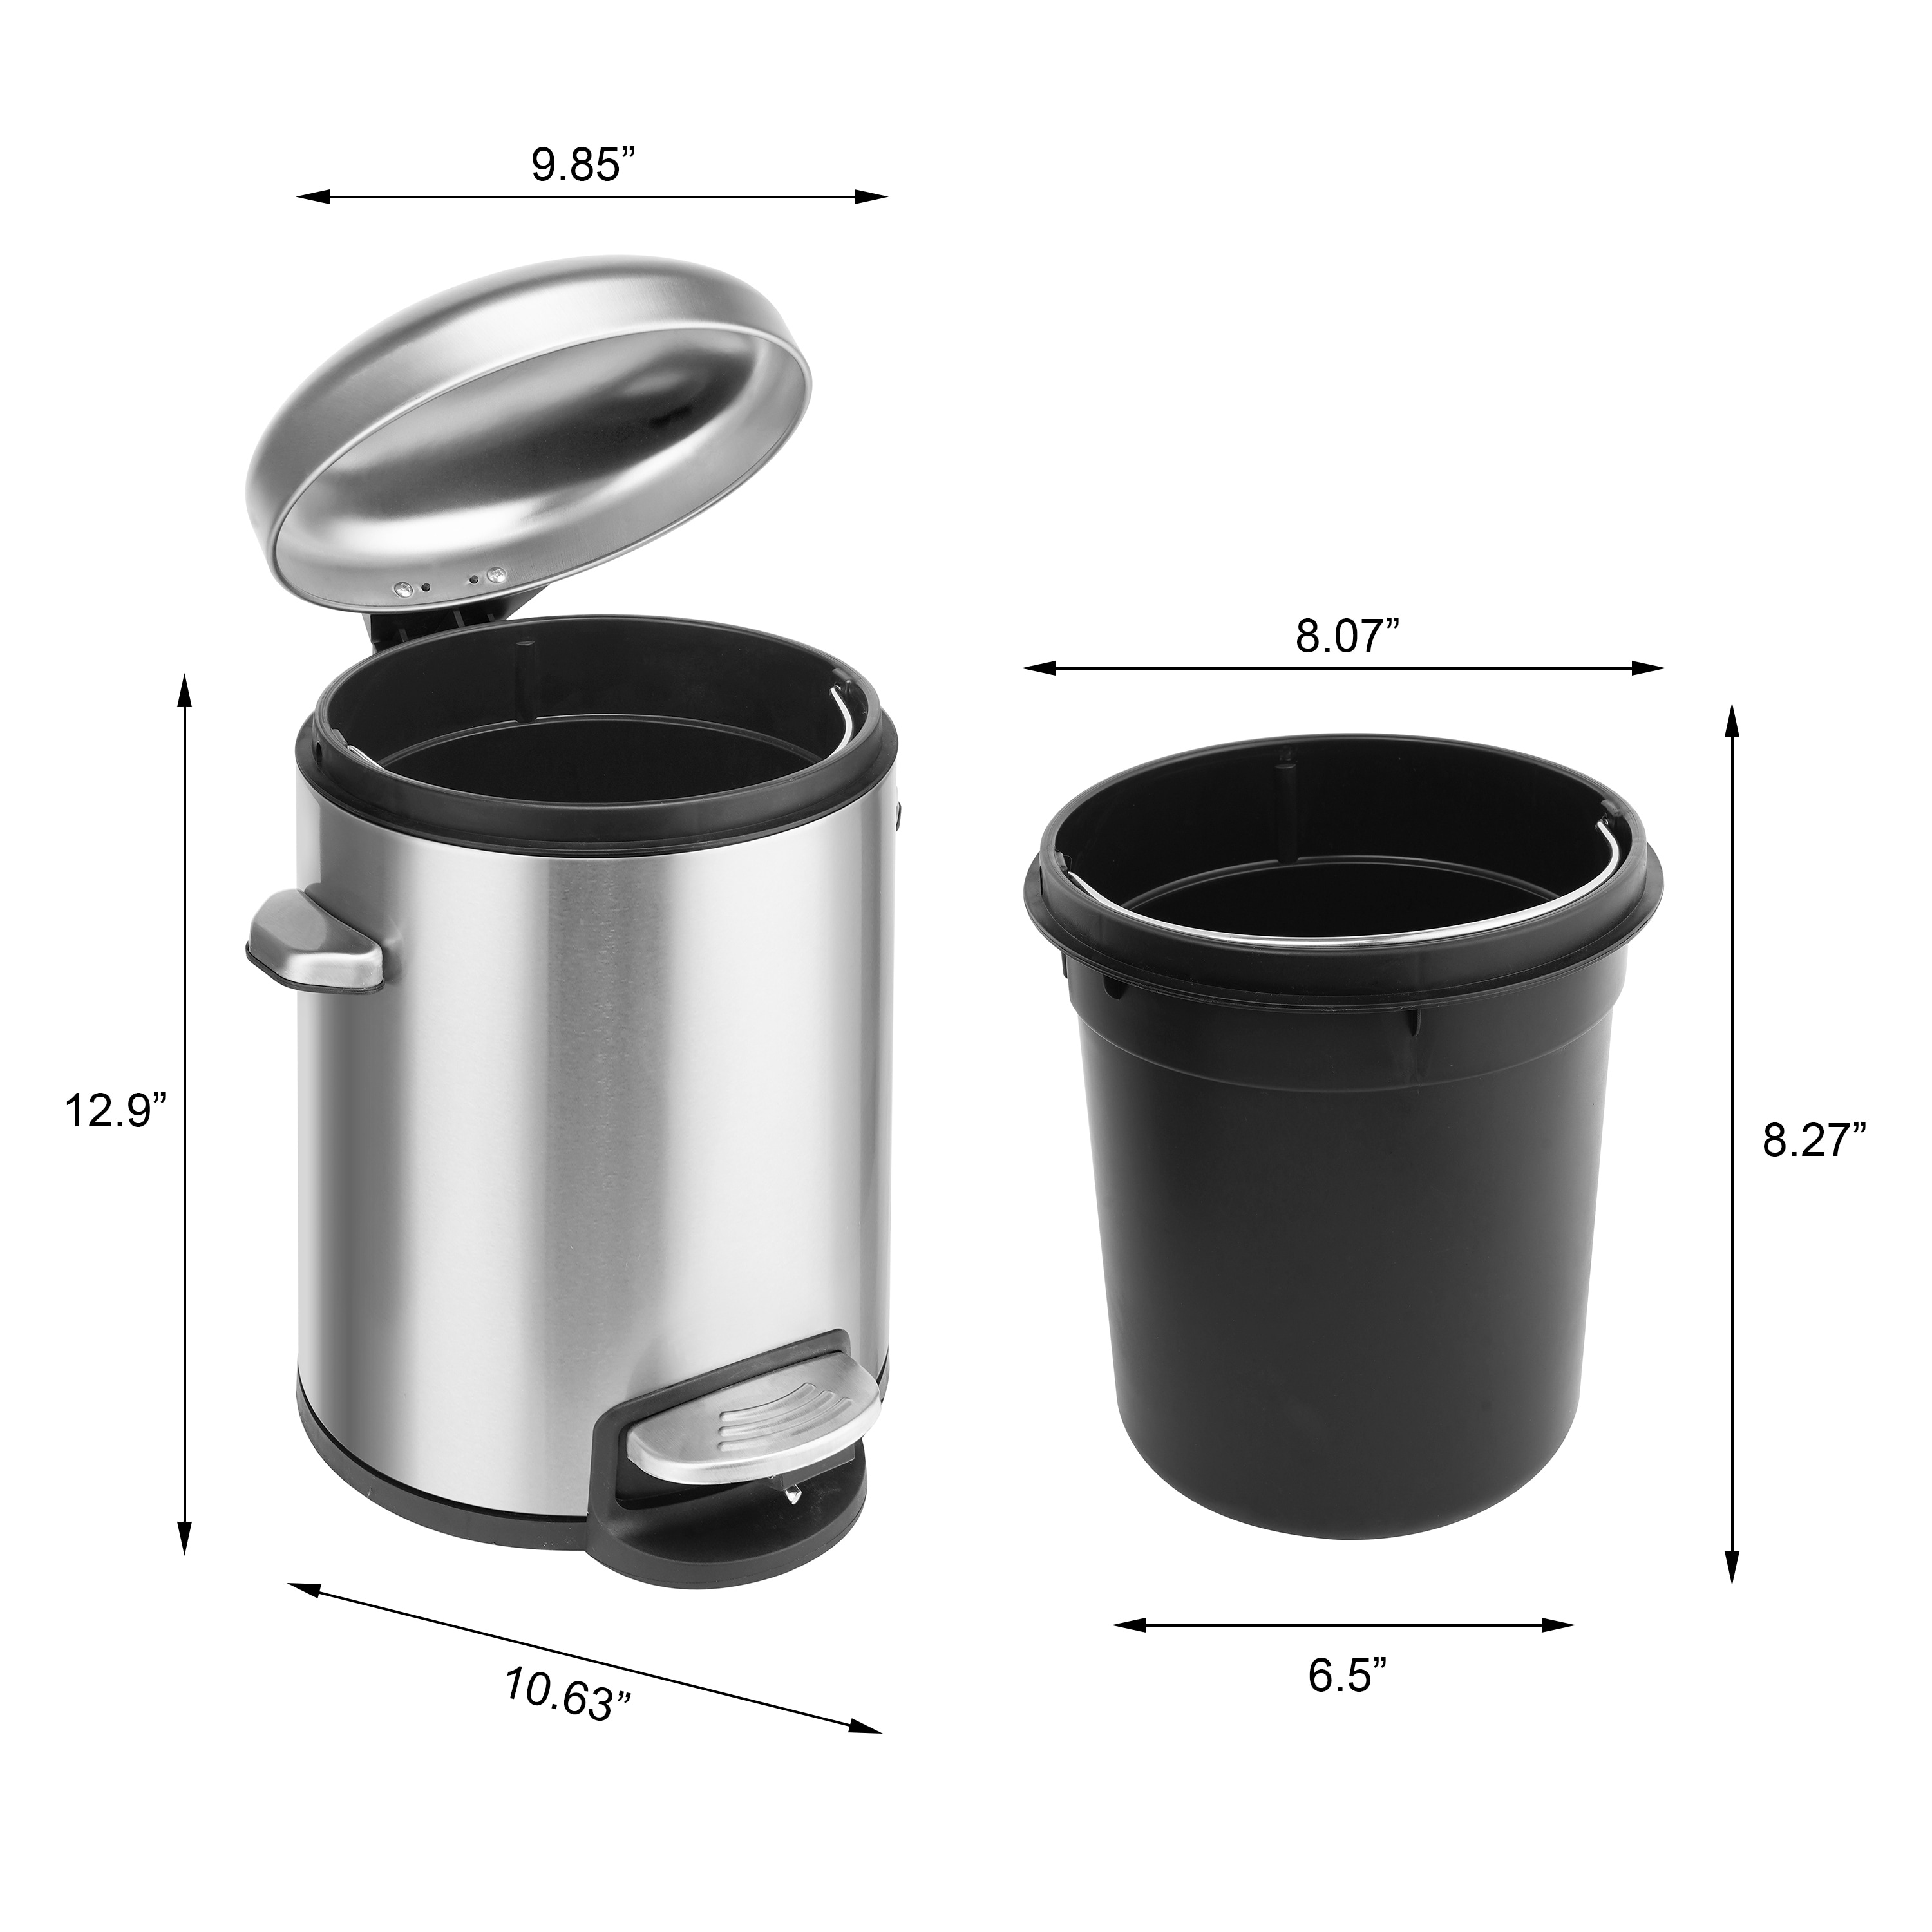 https://ak1.ostkcdn.com/images/products/is/images/direct/4d5e199093da5b45e149afb1557a82f4296b437b/Innovaze-1.32-Gallon-Stainless-Steel-Round-Step-on-Bathroom-and-Office-Trash-Can.jpg